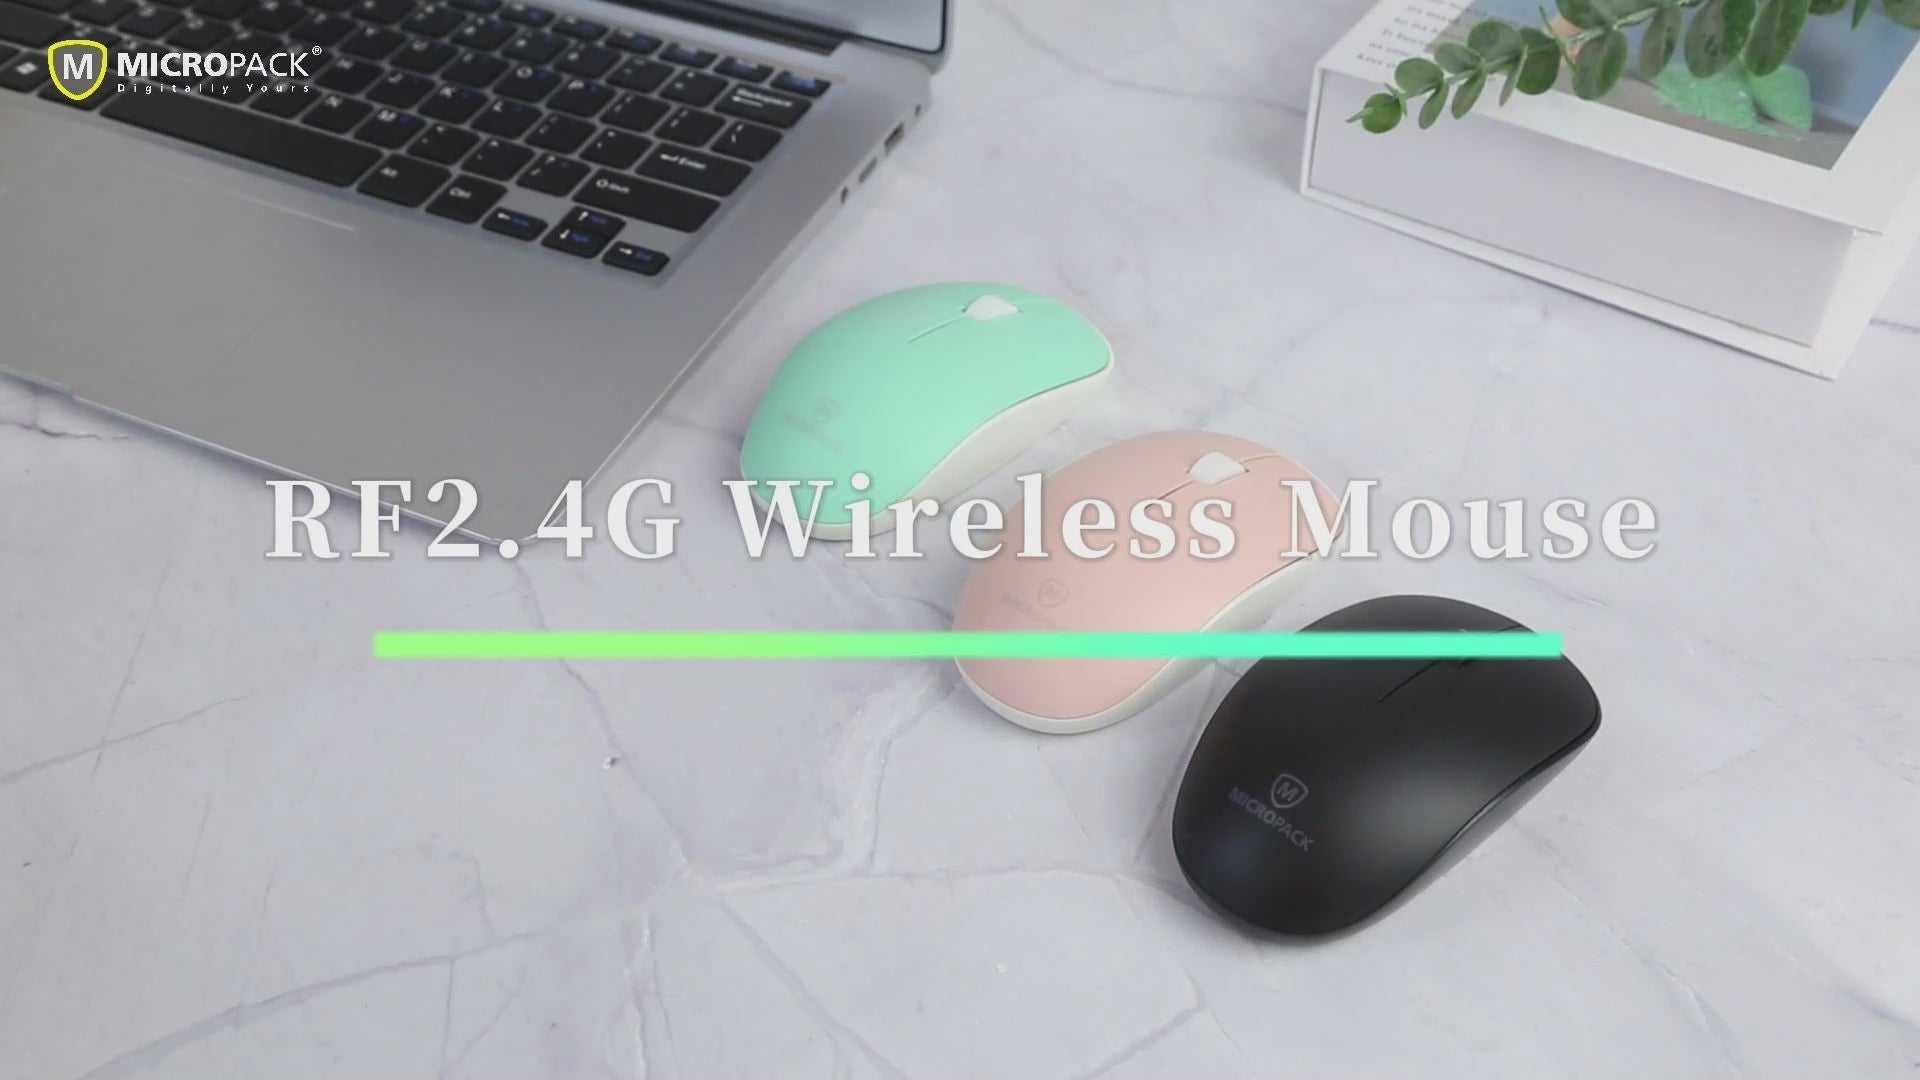 RF 2.4GHz Wireless Mouse MP-721W video